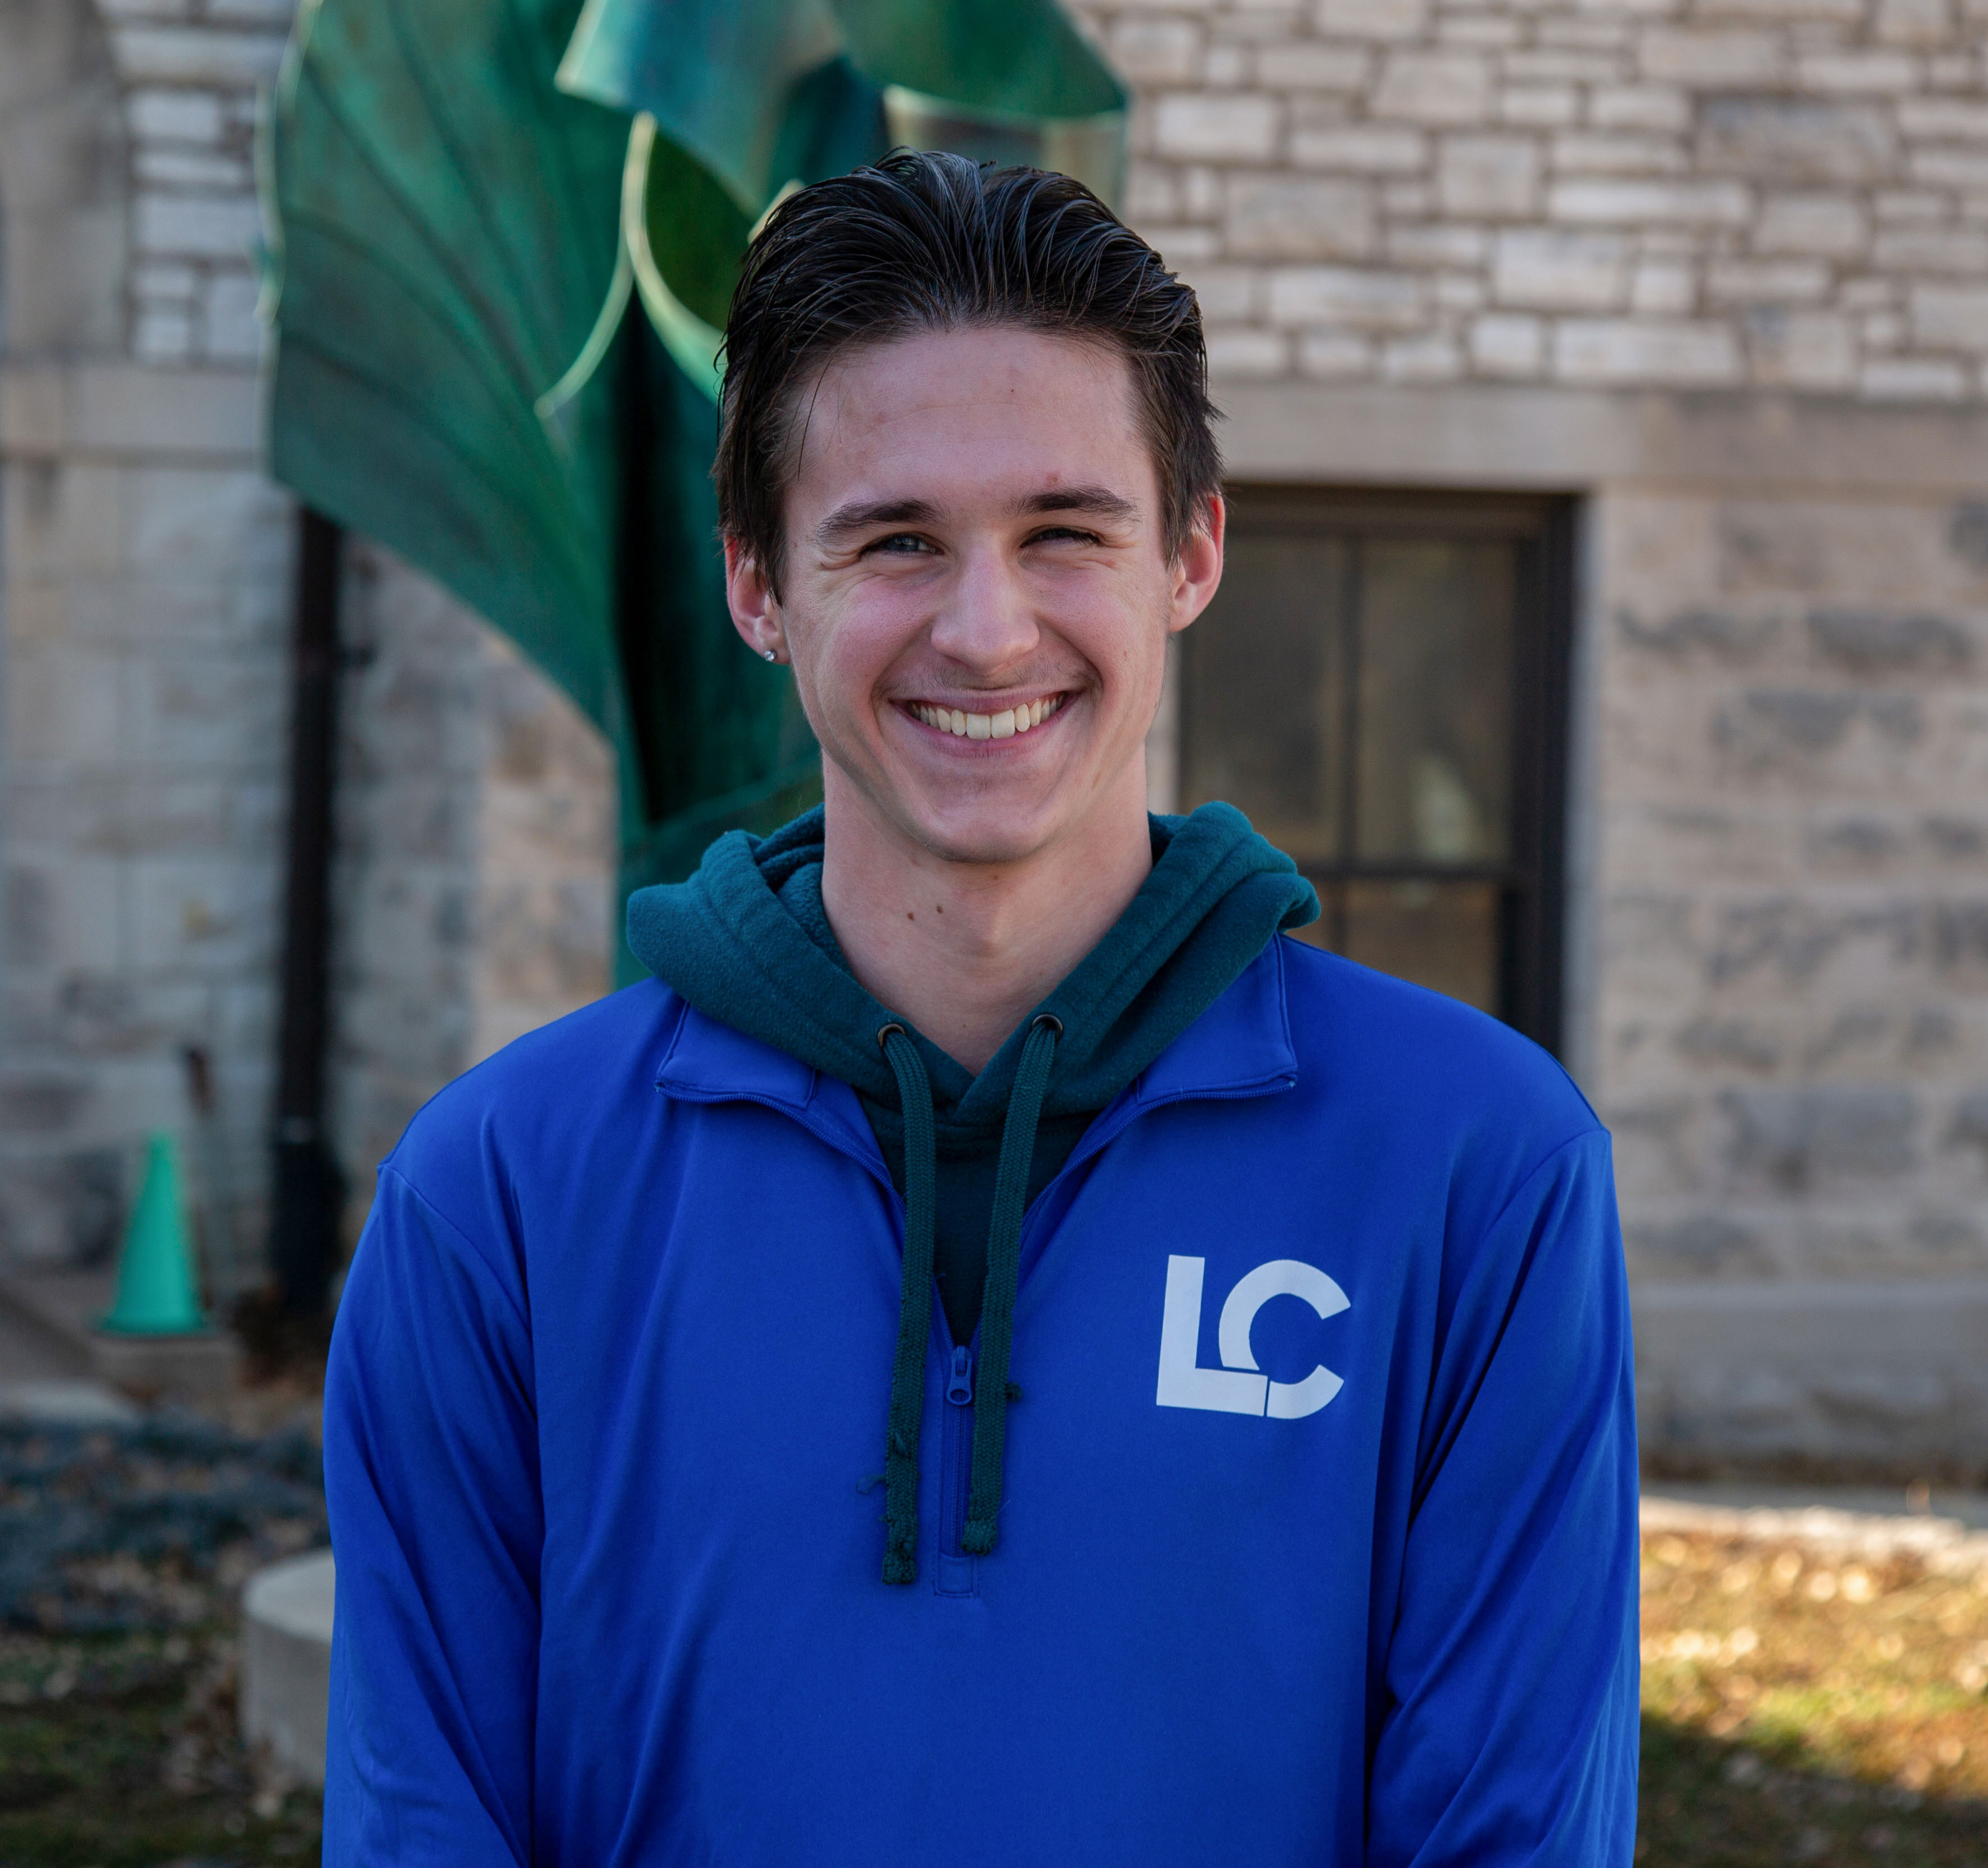 Lewis and Clark Community College student ambassador Nathan Gilbert found a second home and an encouraging family on campus.